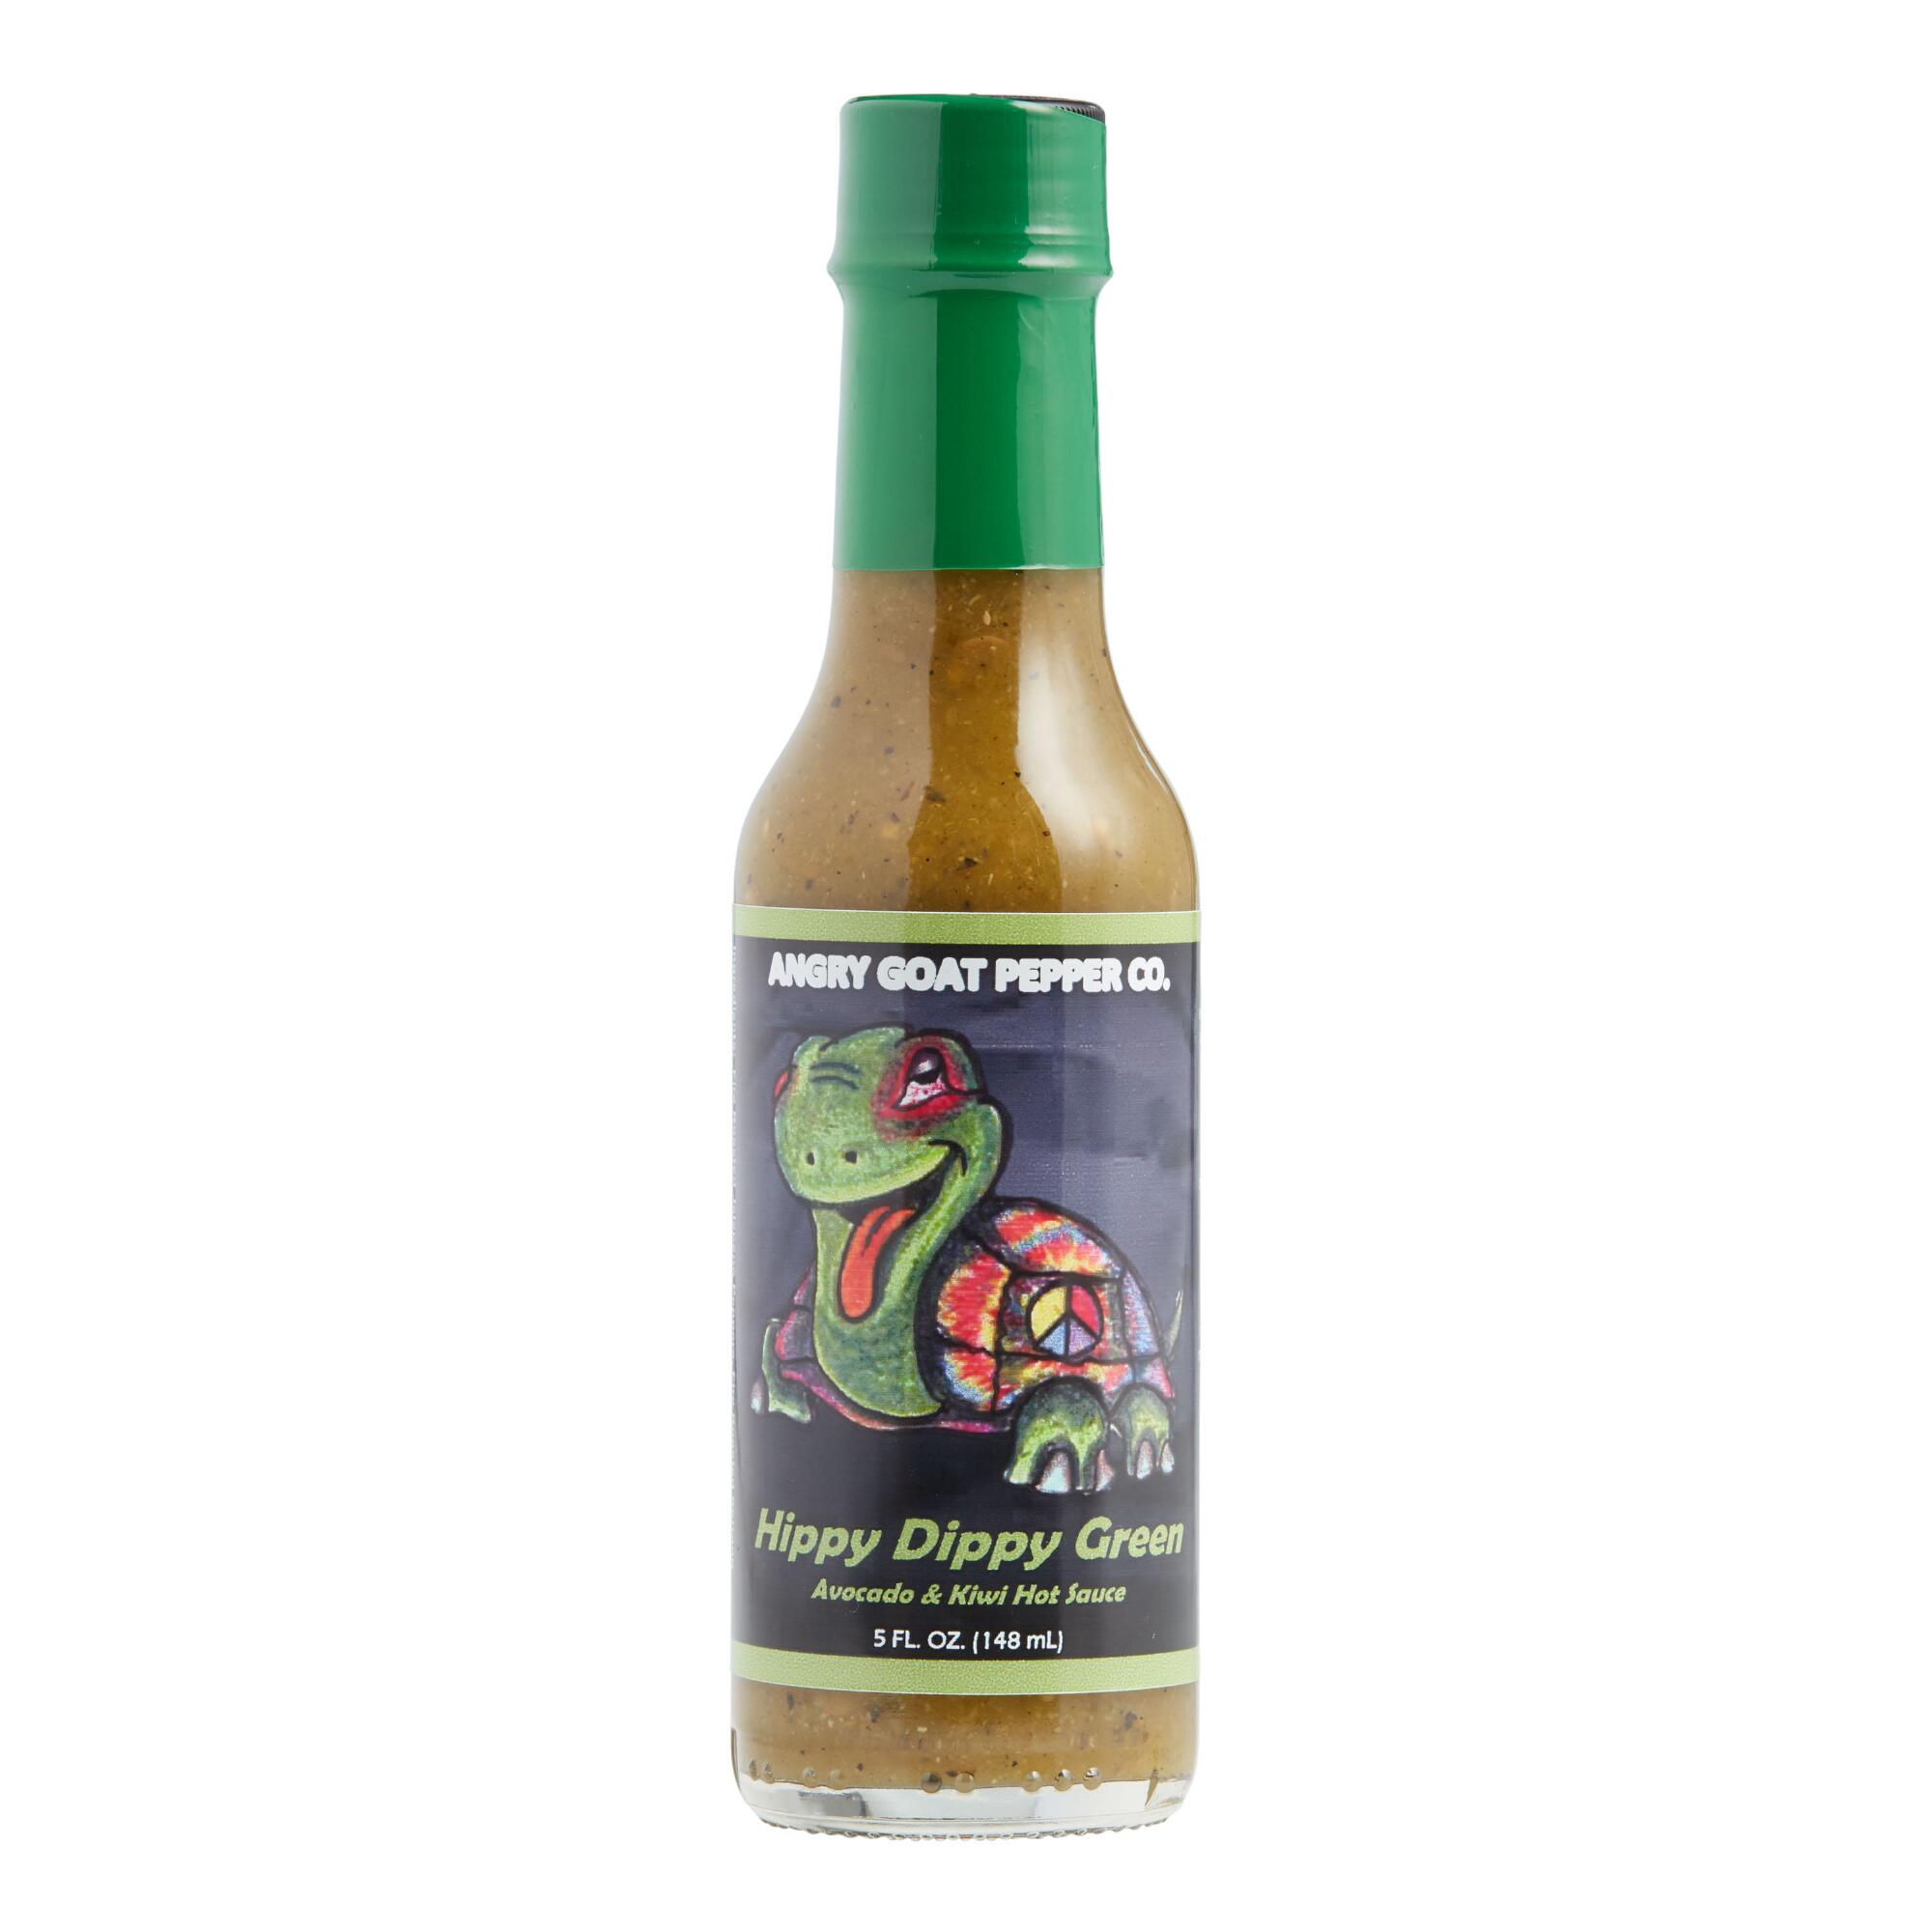 Angry Goat Pepper Company Hippy Dippy Green Hot Sauce by World Market